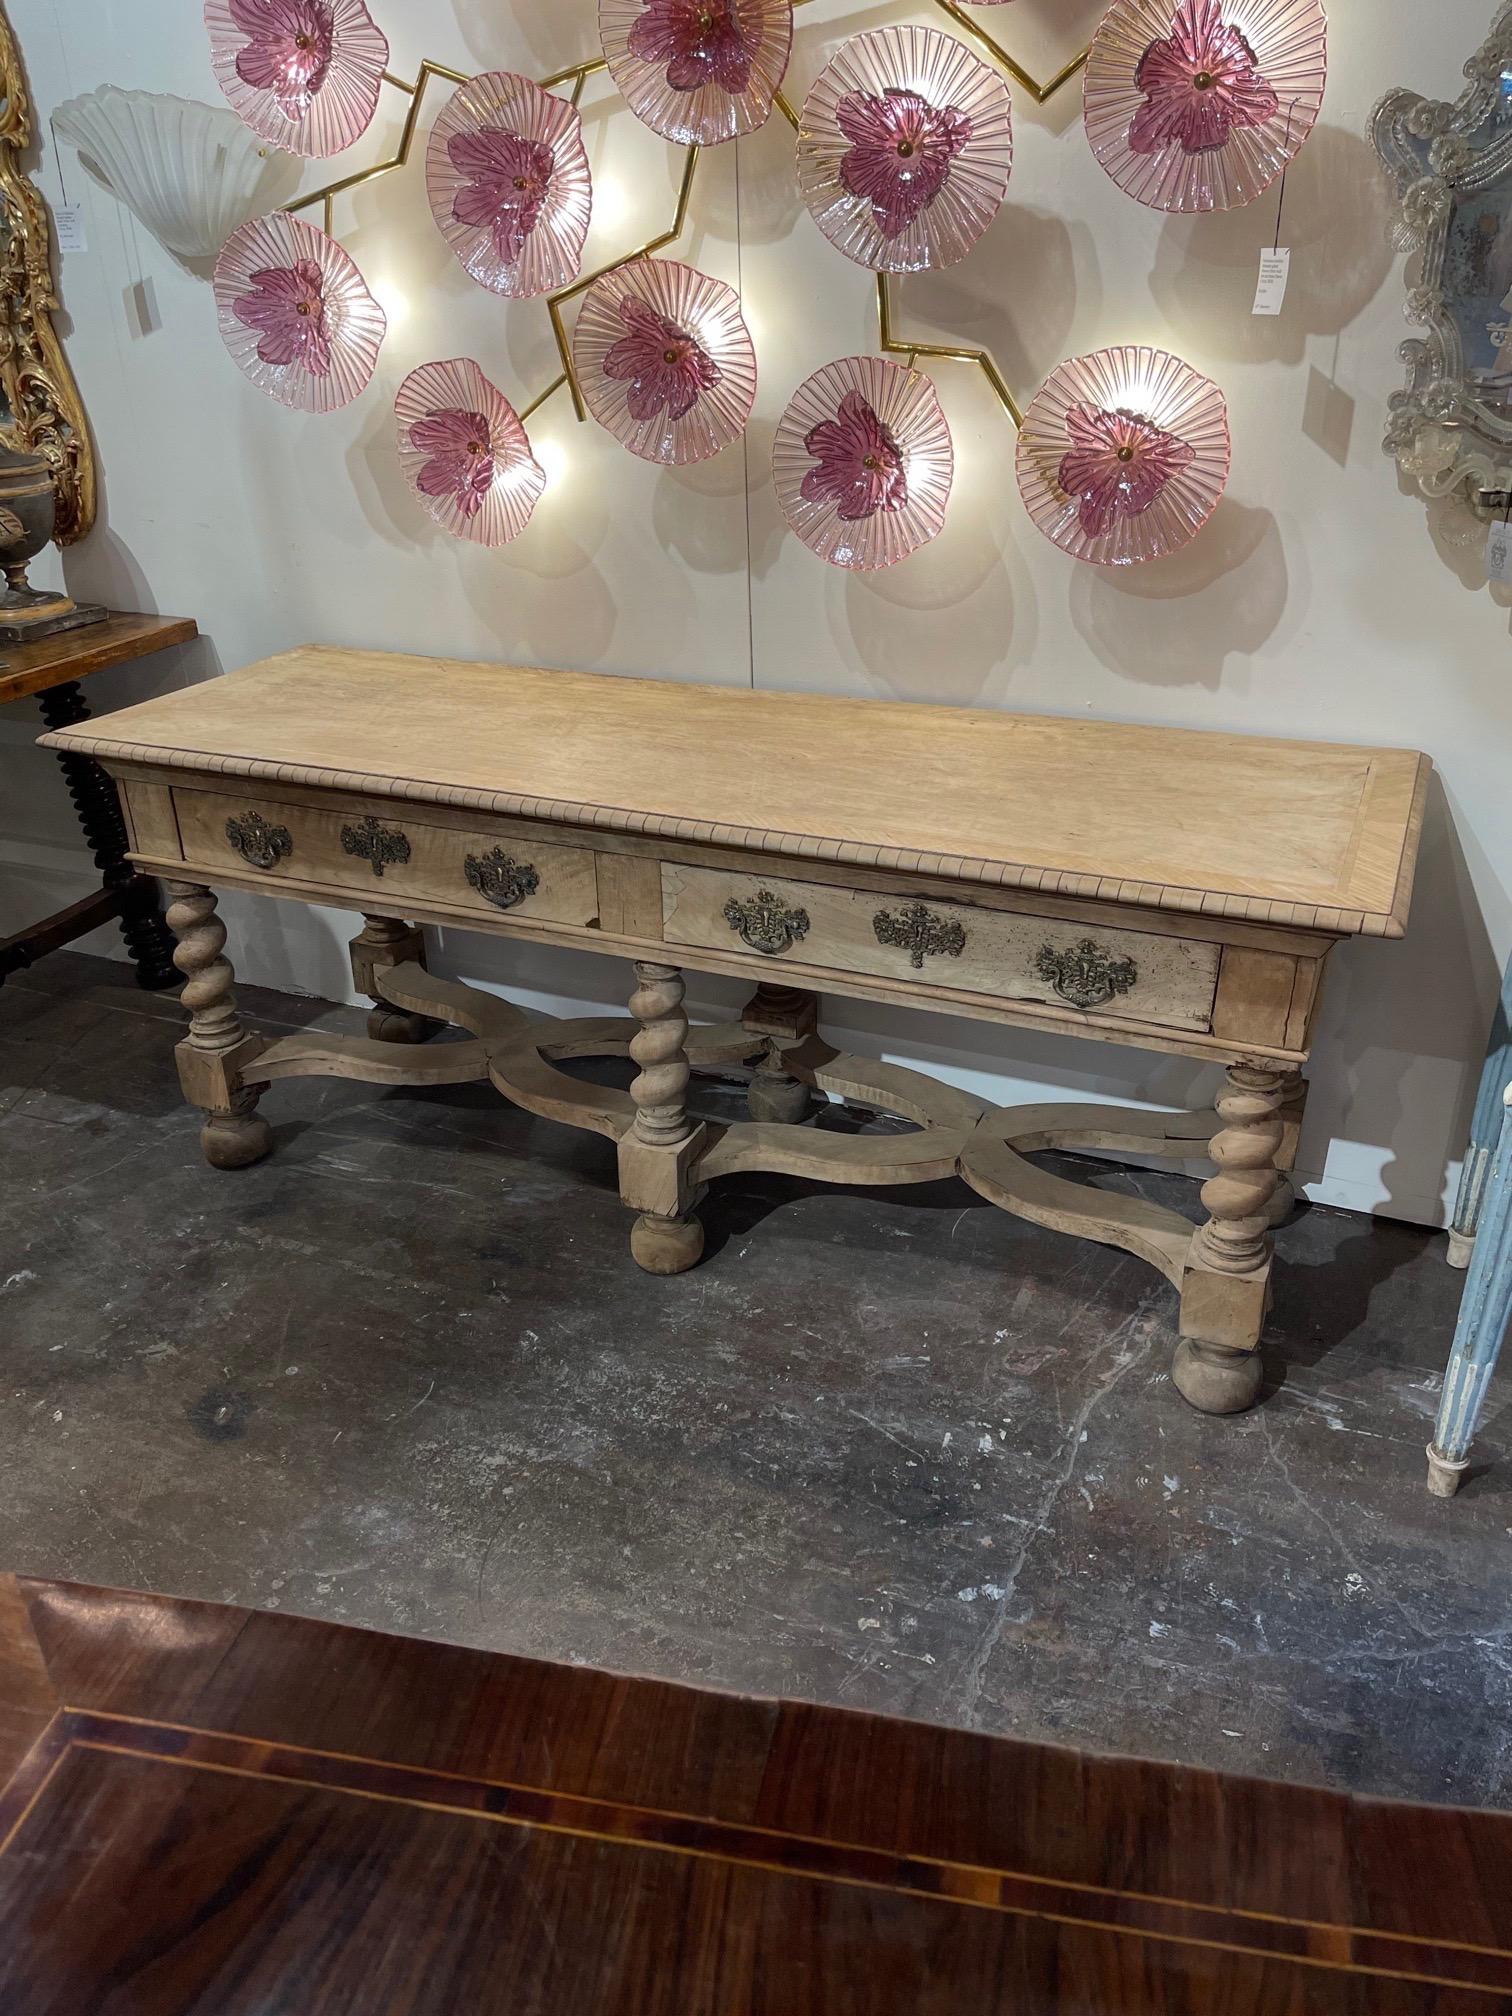 Beautiful 19th century French bleached walnut sofa table with barley twist legs. Nice patina on this substantial table. This would also work well in a hall or entry way. A very fine piece!